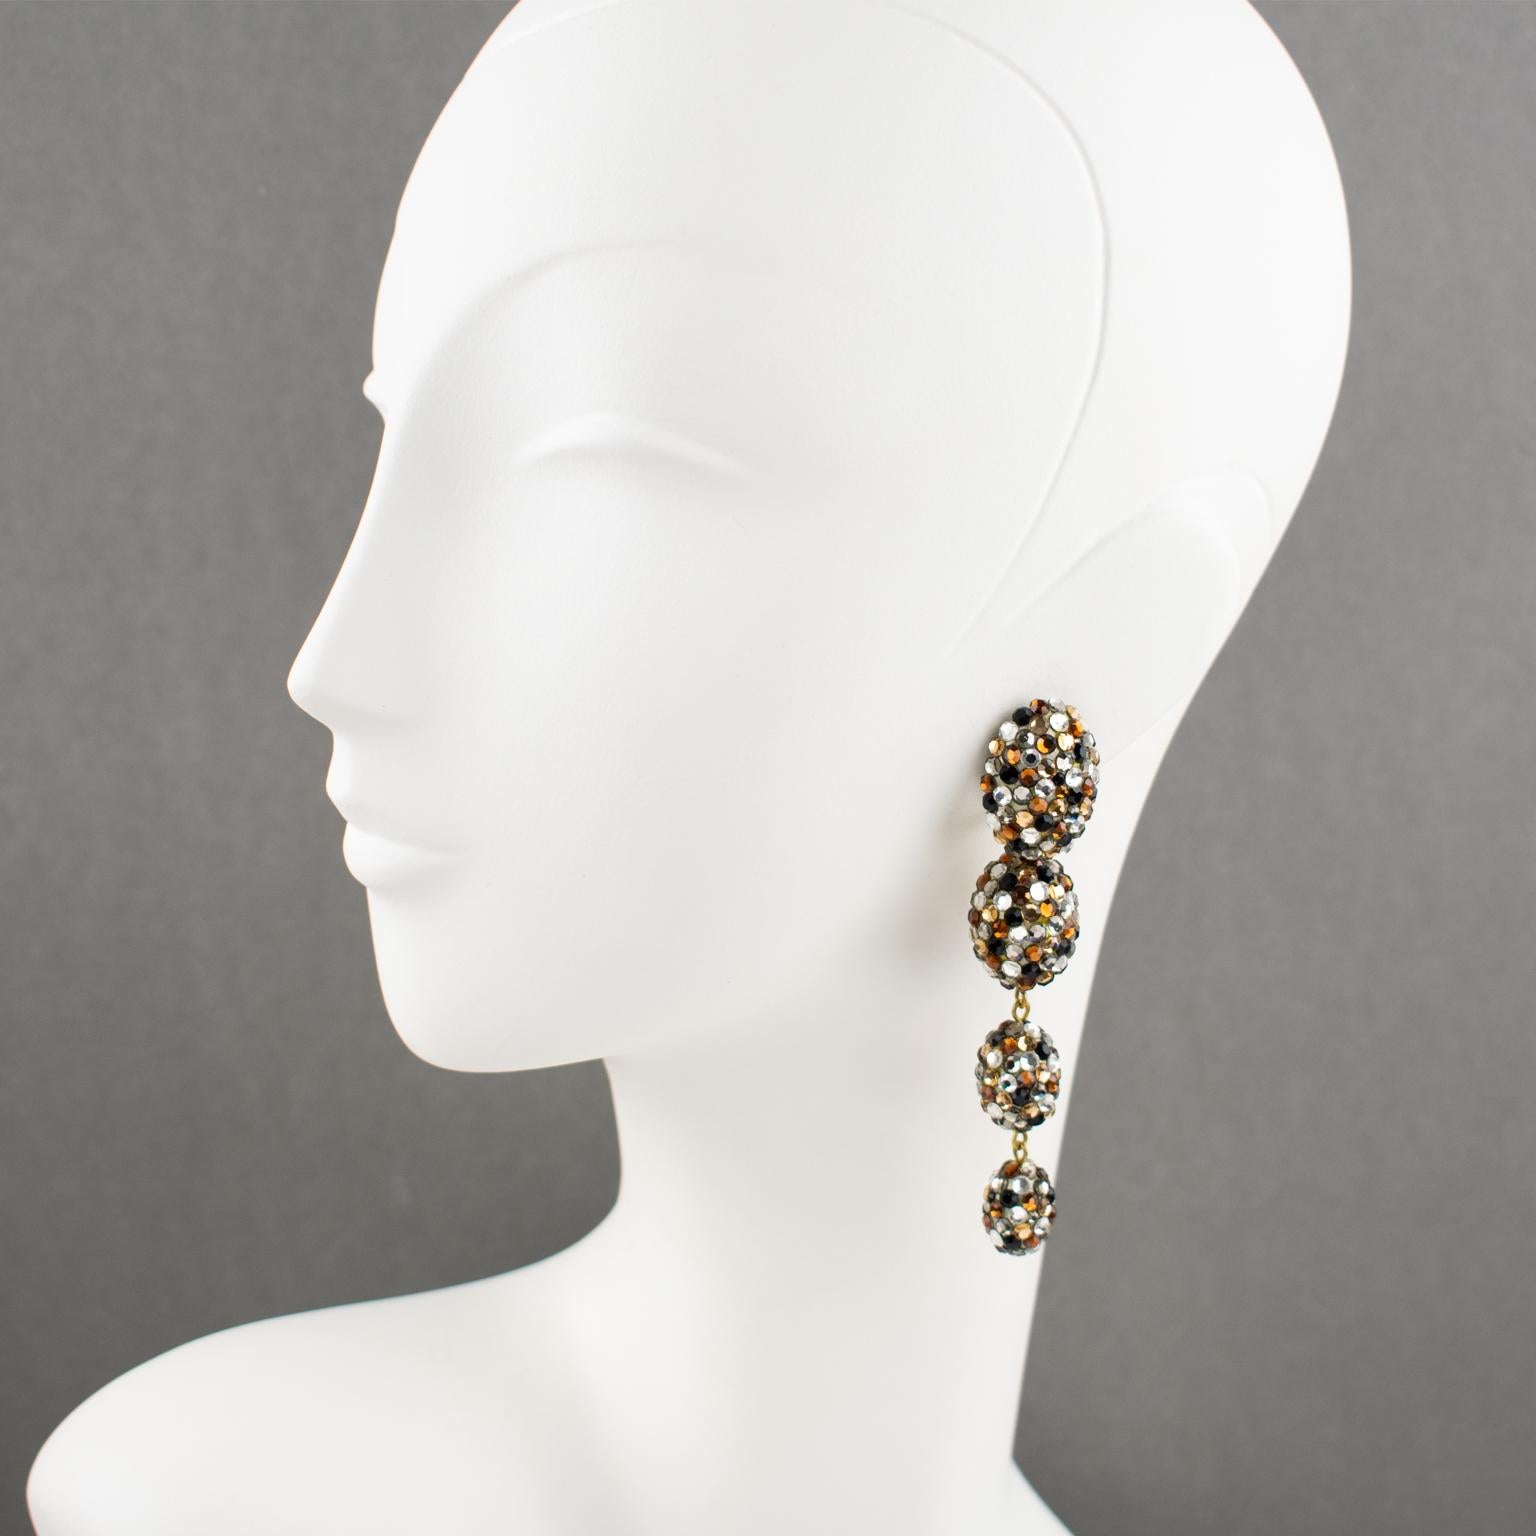 Richard Kerr designed these gorgeous statement clip-on earrings in the 1980s. They are made up of his signature pave rhinestones. The extra-long dangling design with graduated egg-shaped beads is all covered with crystal rhinestones on a beige resin